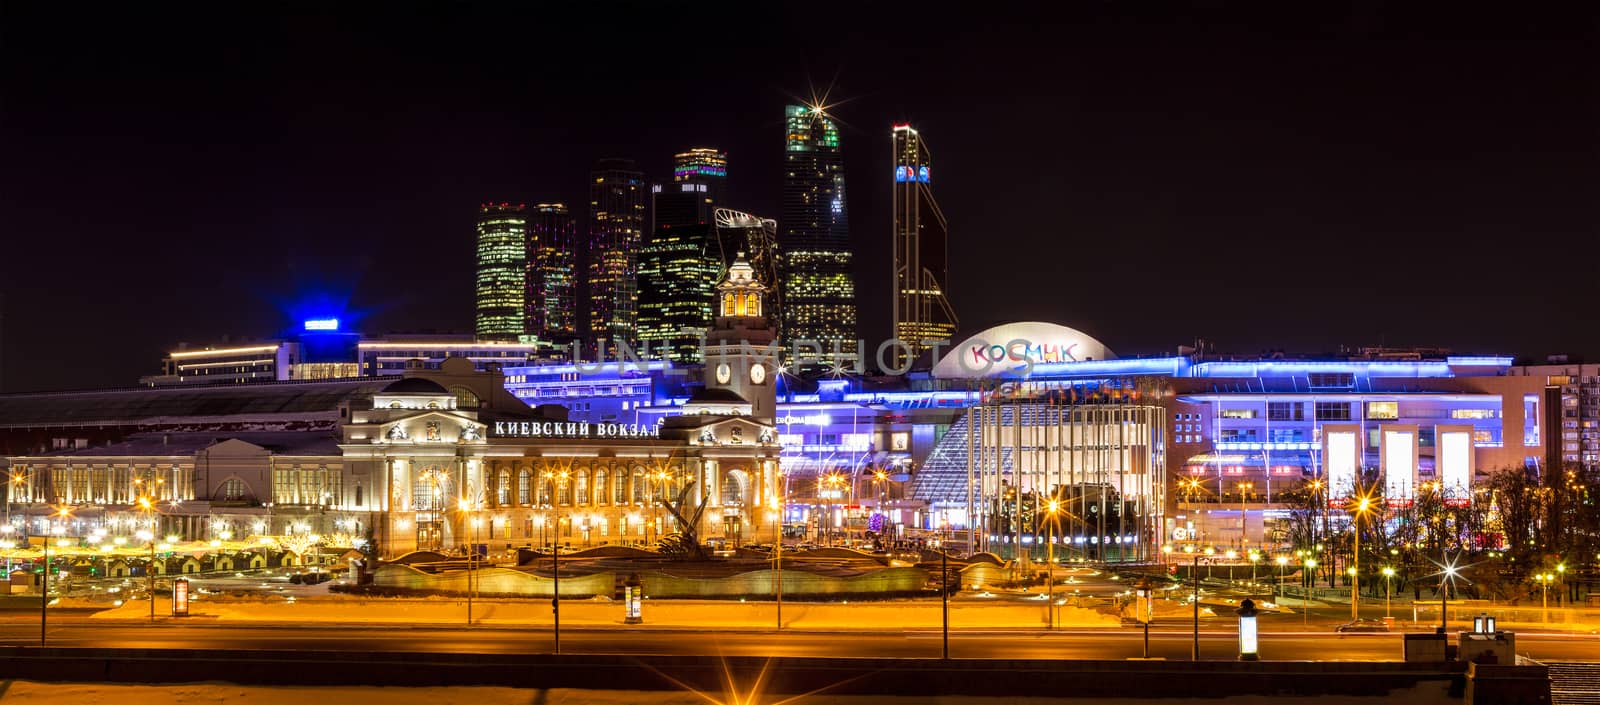 Moskva River embankment: Moscow-City, railway station, shopping  by straannick